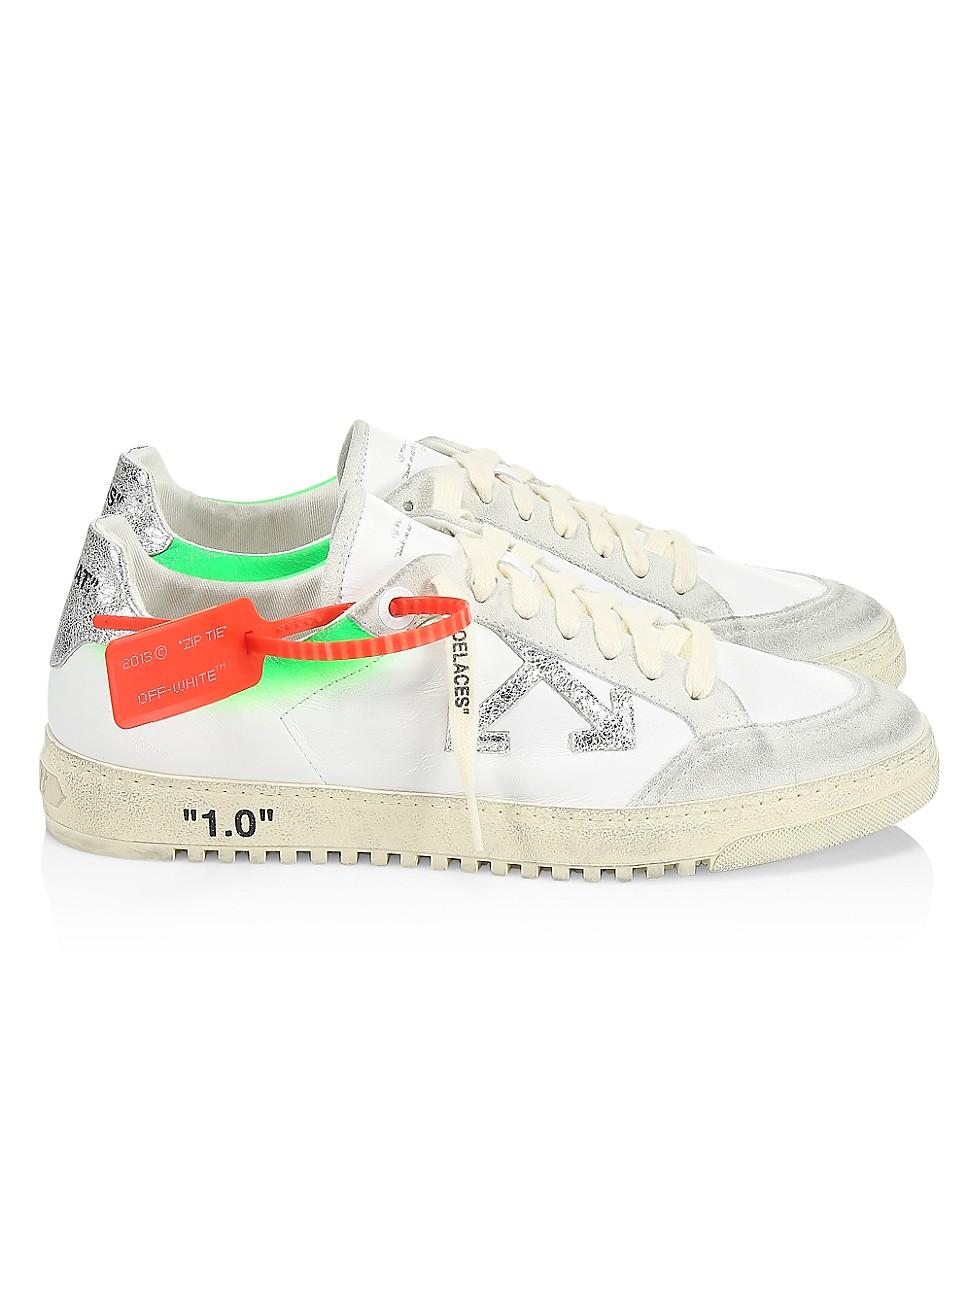 Off-White c/o Abloh 2.0 Neon Accent Leather Low-top Sneakers in White Green (White) for Men - Lyst